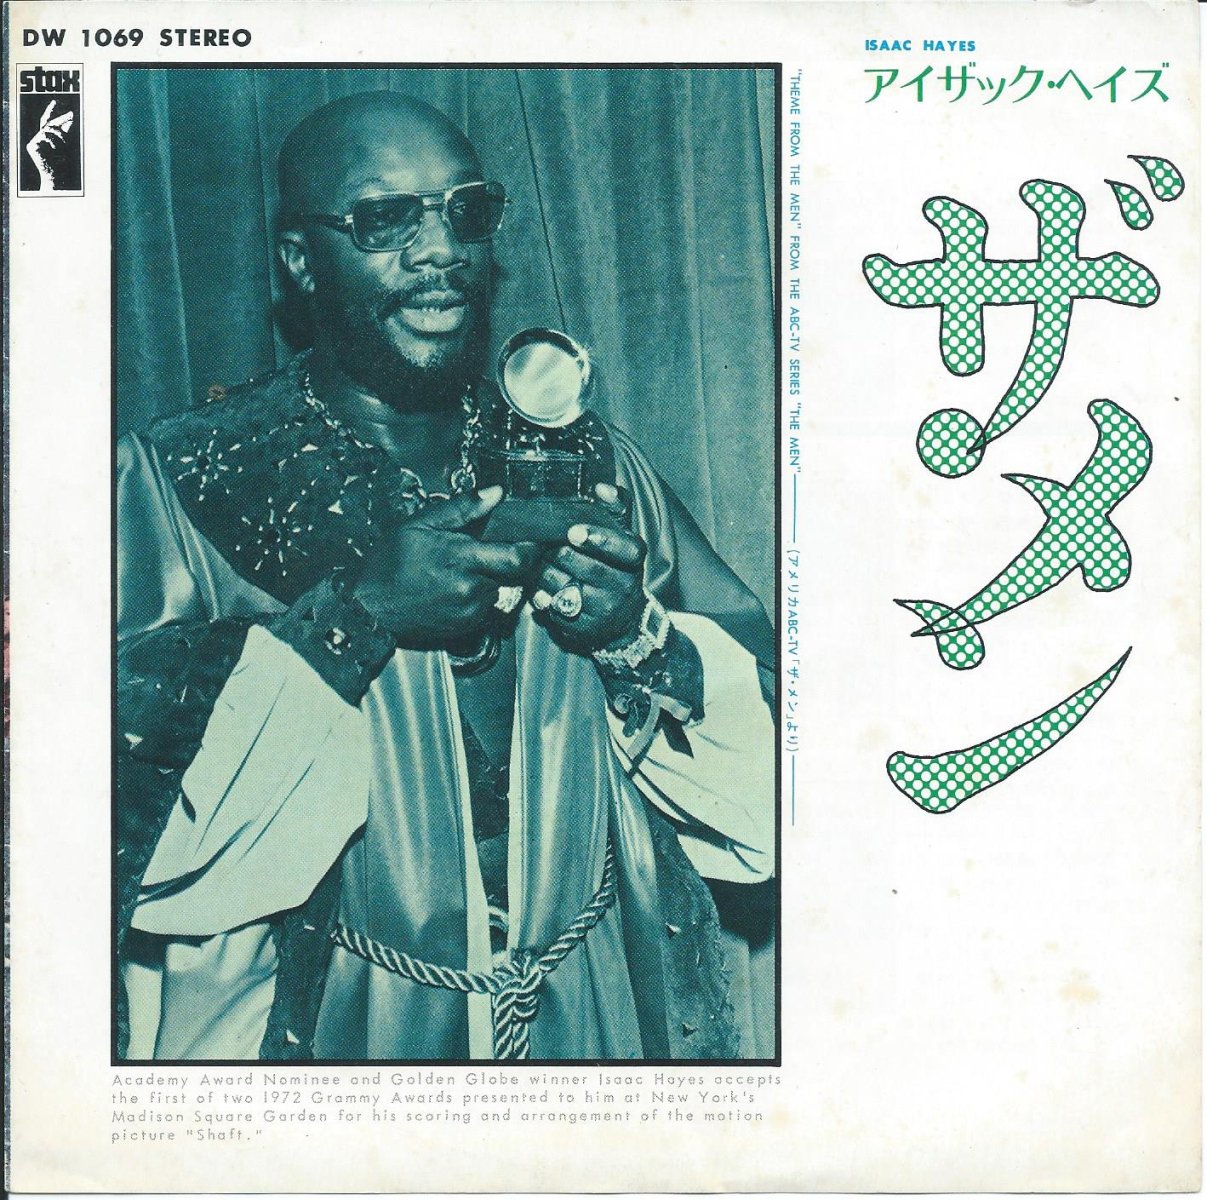 åإ ISAAC HAYES /  THEME FROM THE MEN / ס TYPE THANG (7